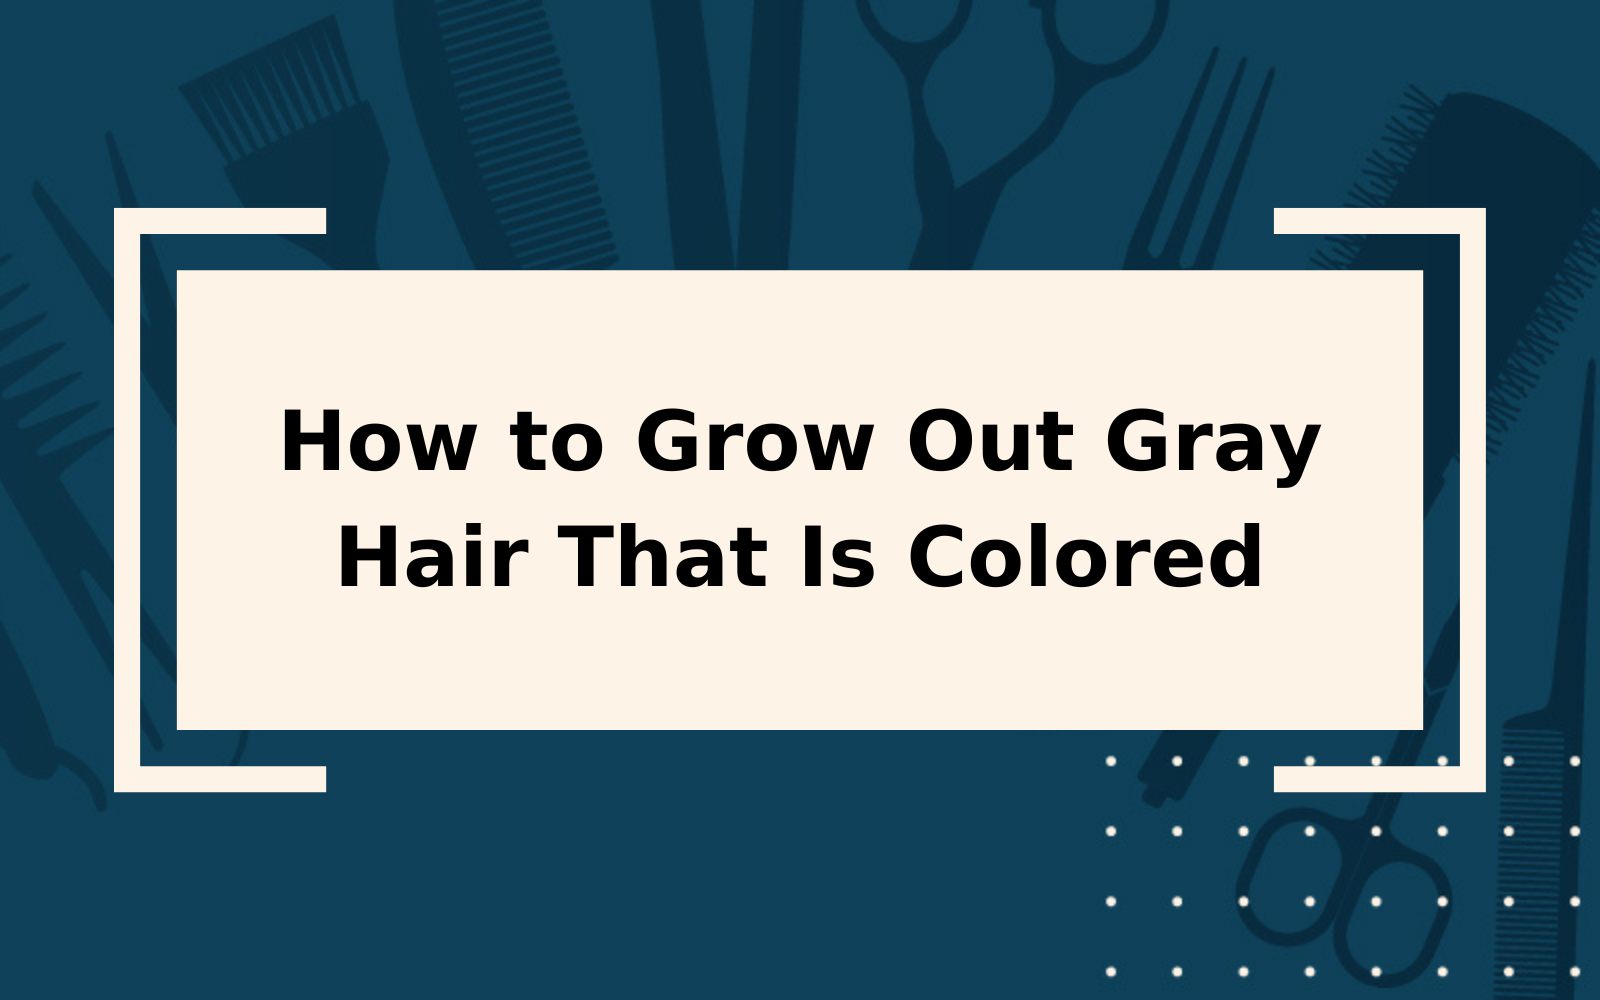 How to Grow Out Gray Hair That Is Colored | Step-by-Step